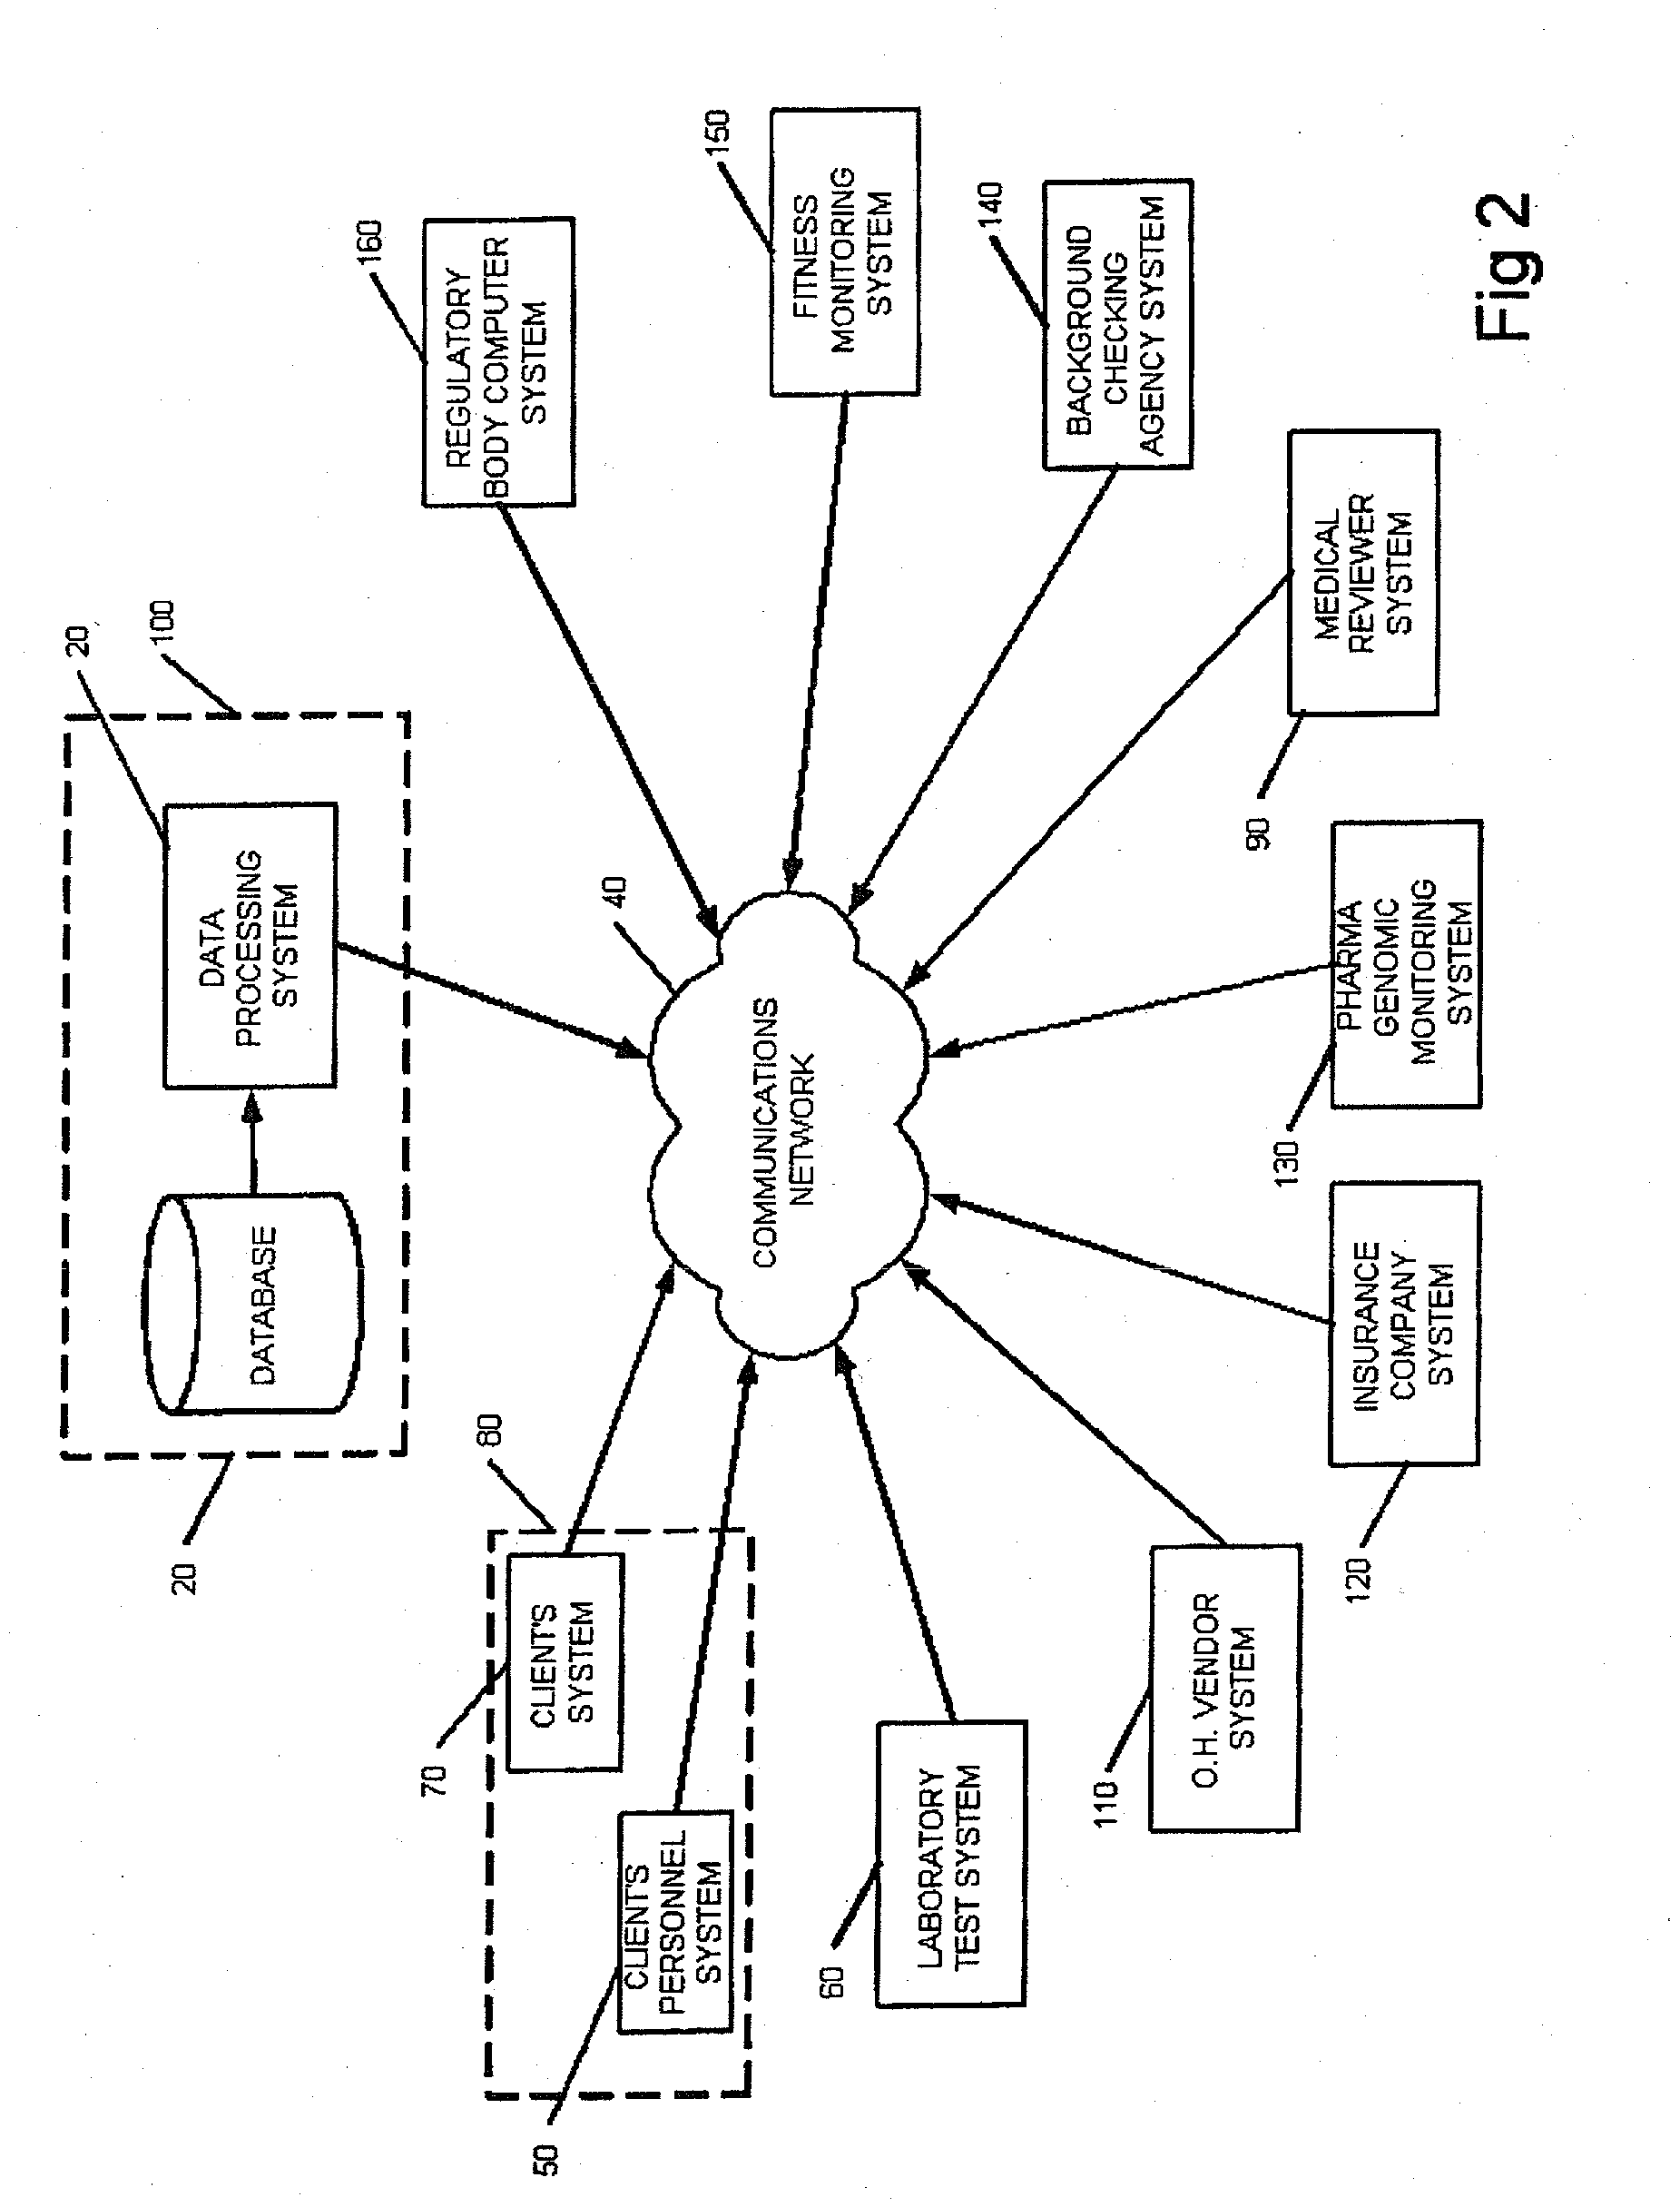 Occupational health data system and method